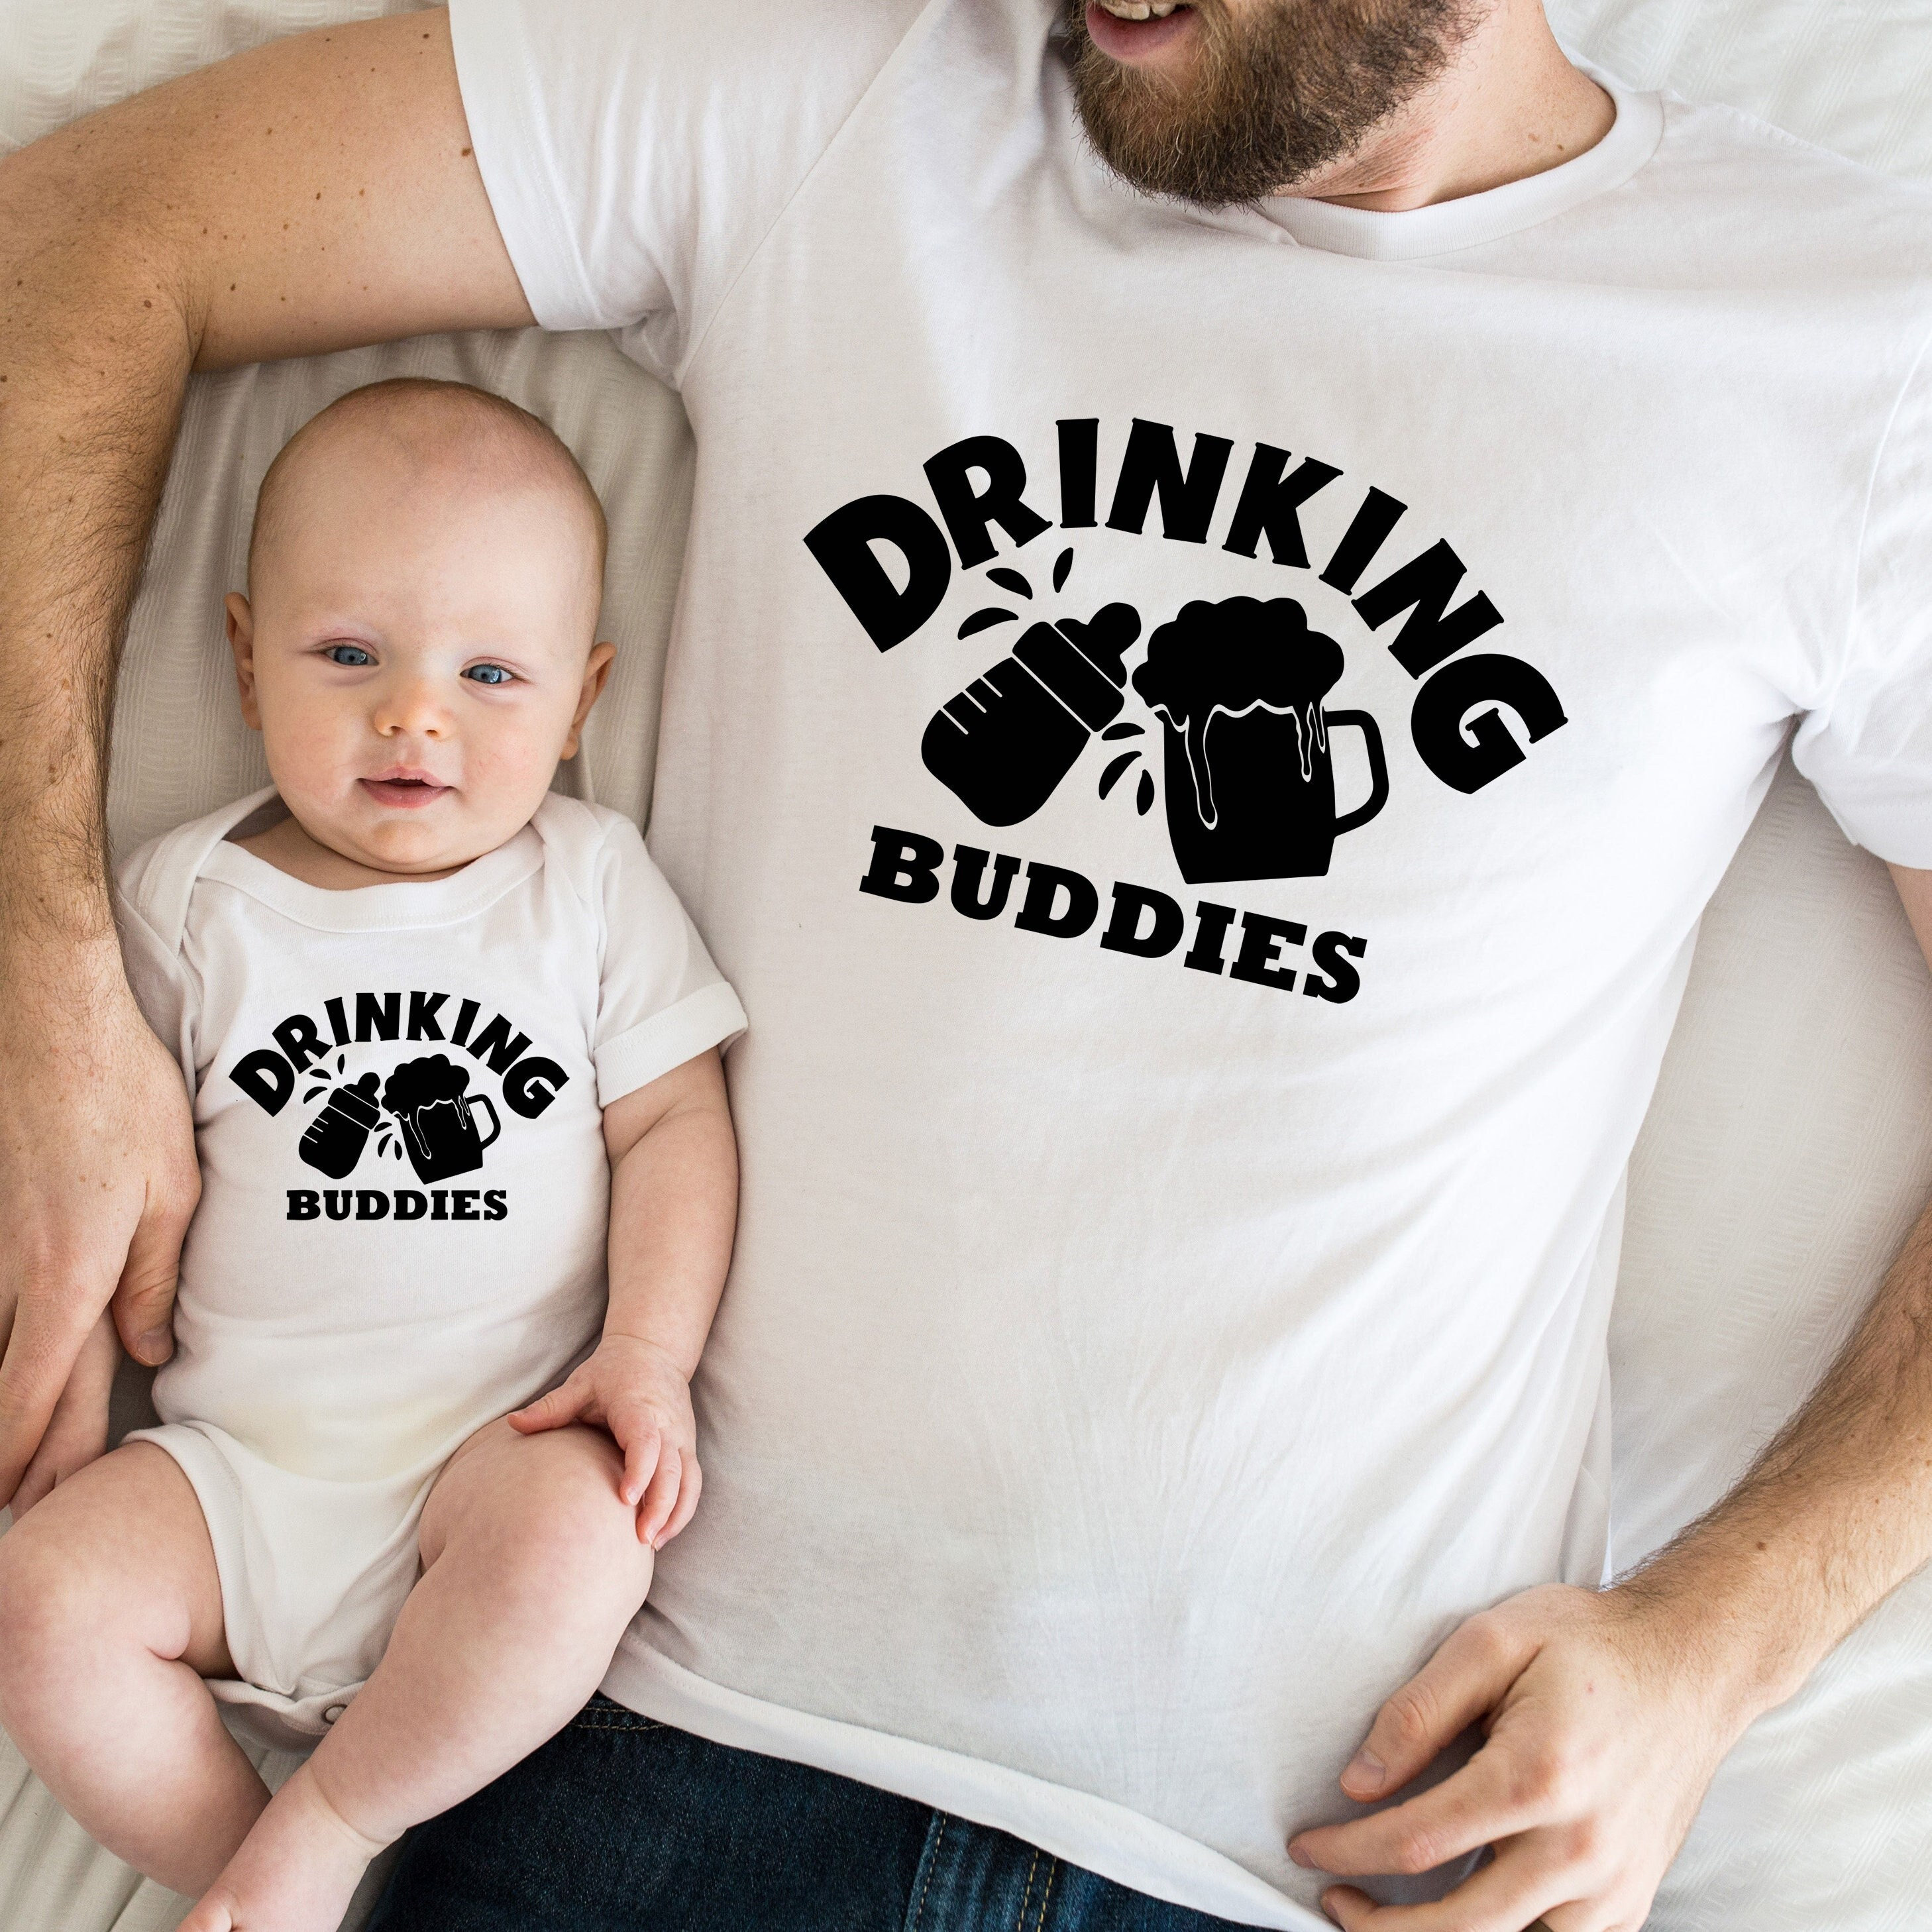 Drinking Buddies Shirt, Father and Son Matching Shirt, Daddy Daughter Tee, New Baby Bodysuit, Cool Dad Shirts, Fathers Day Shirts